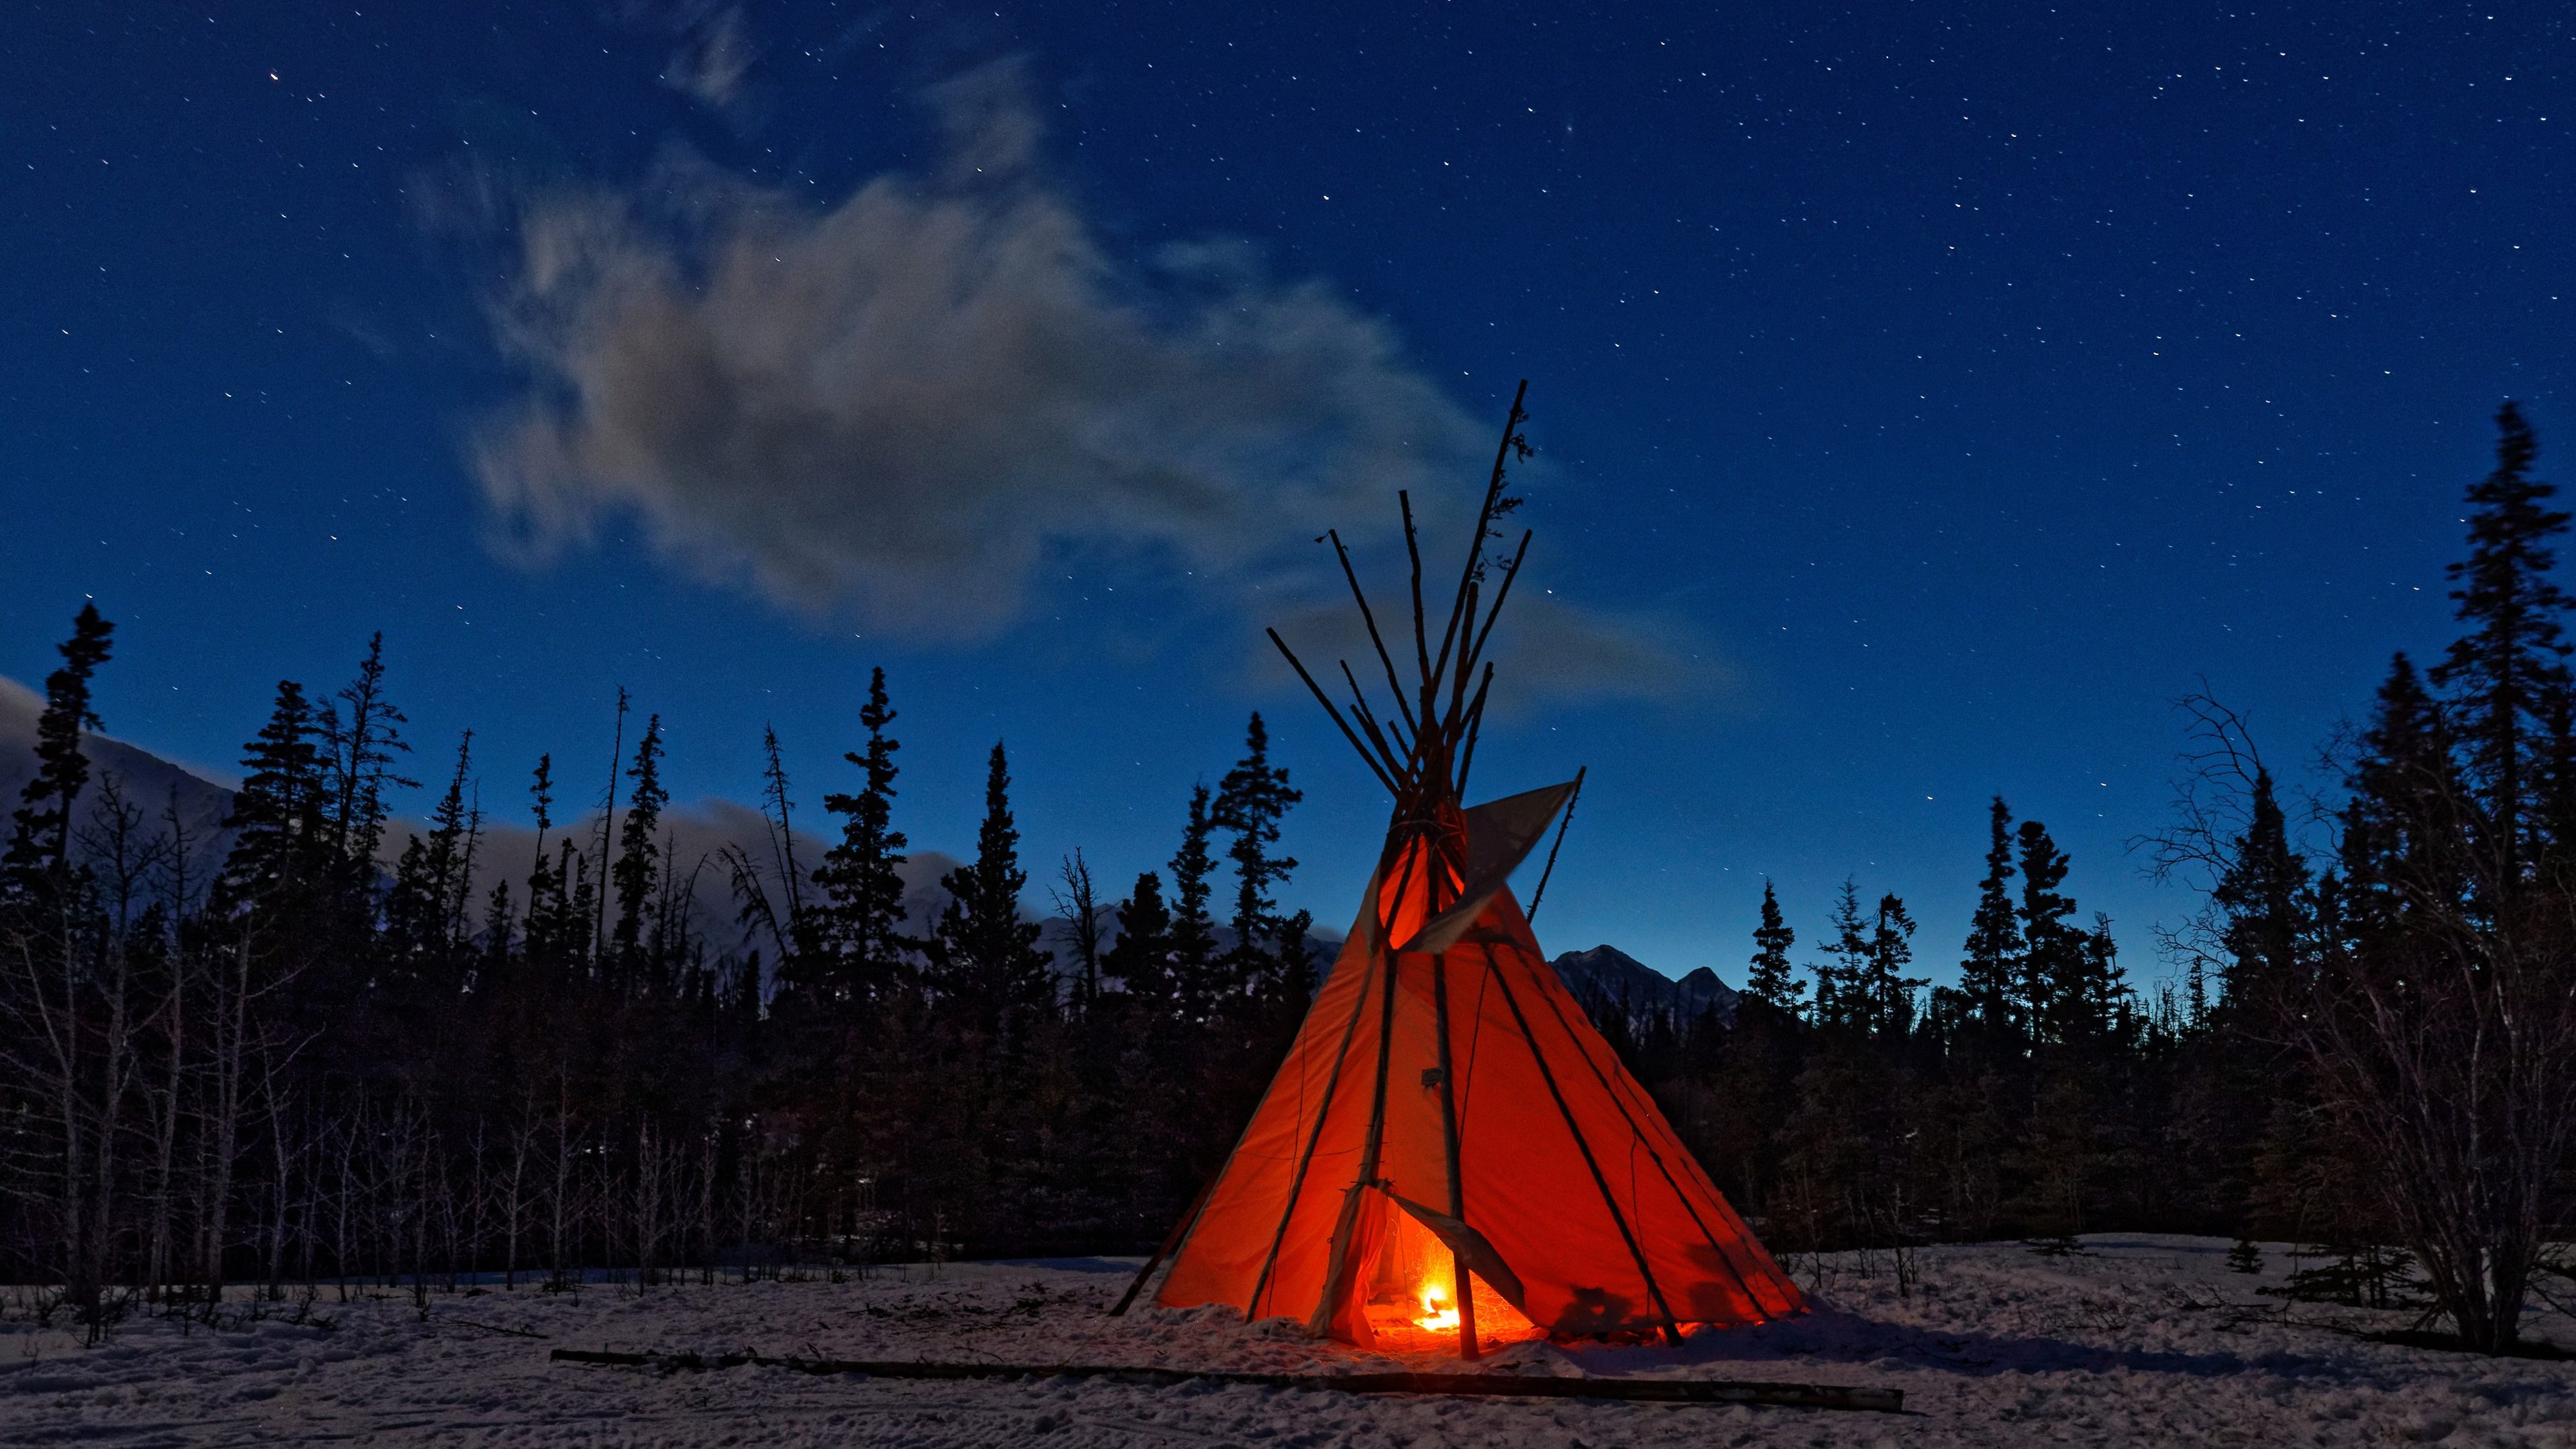 Teepee in the forest at night